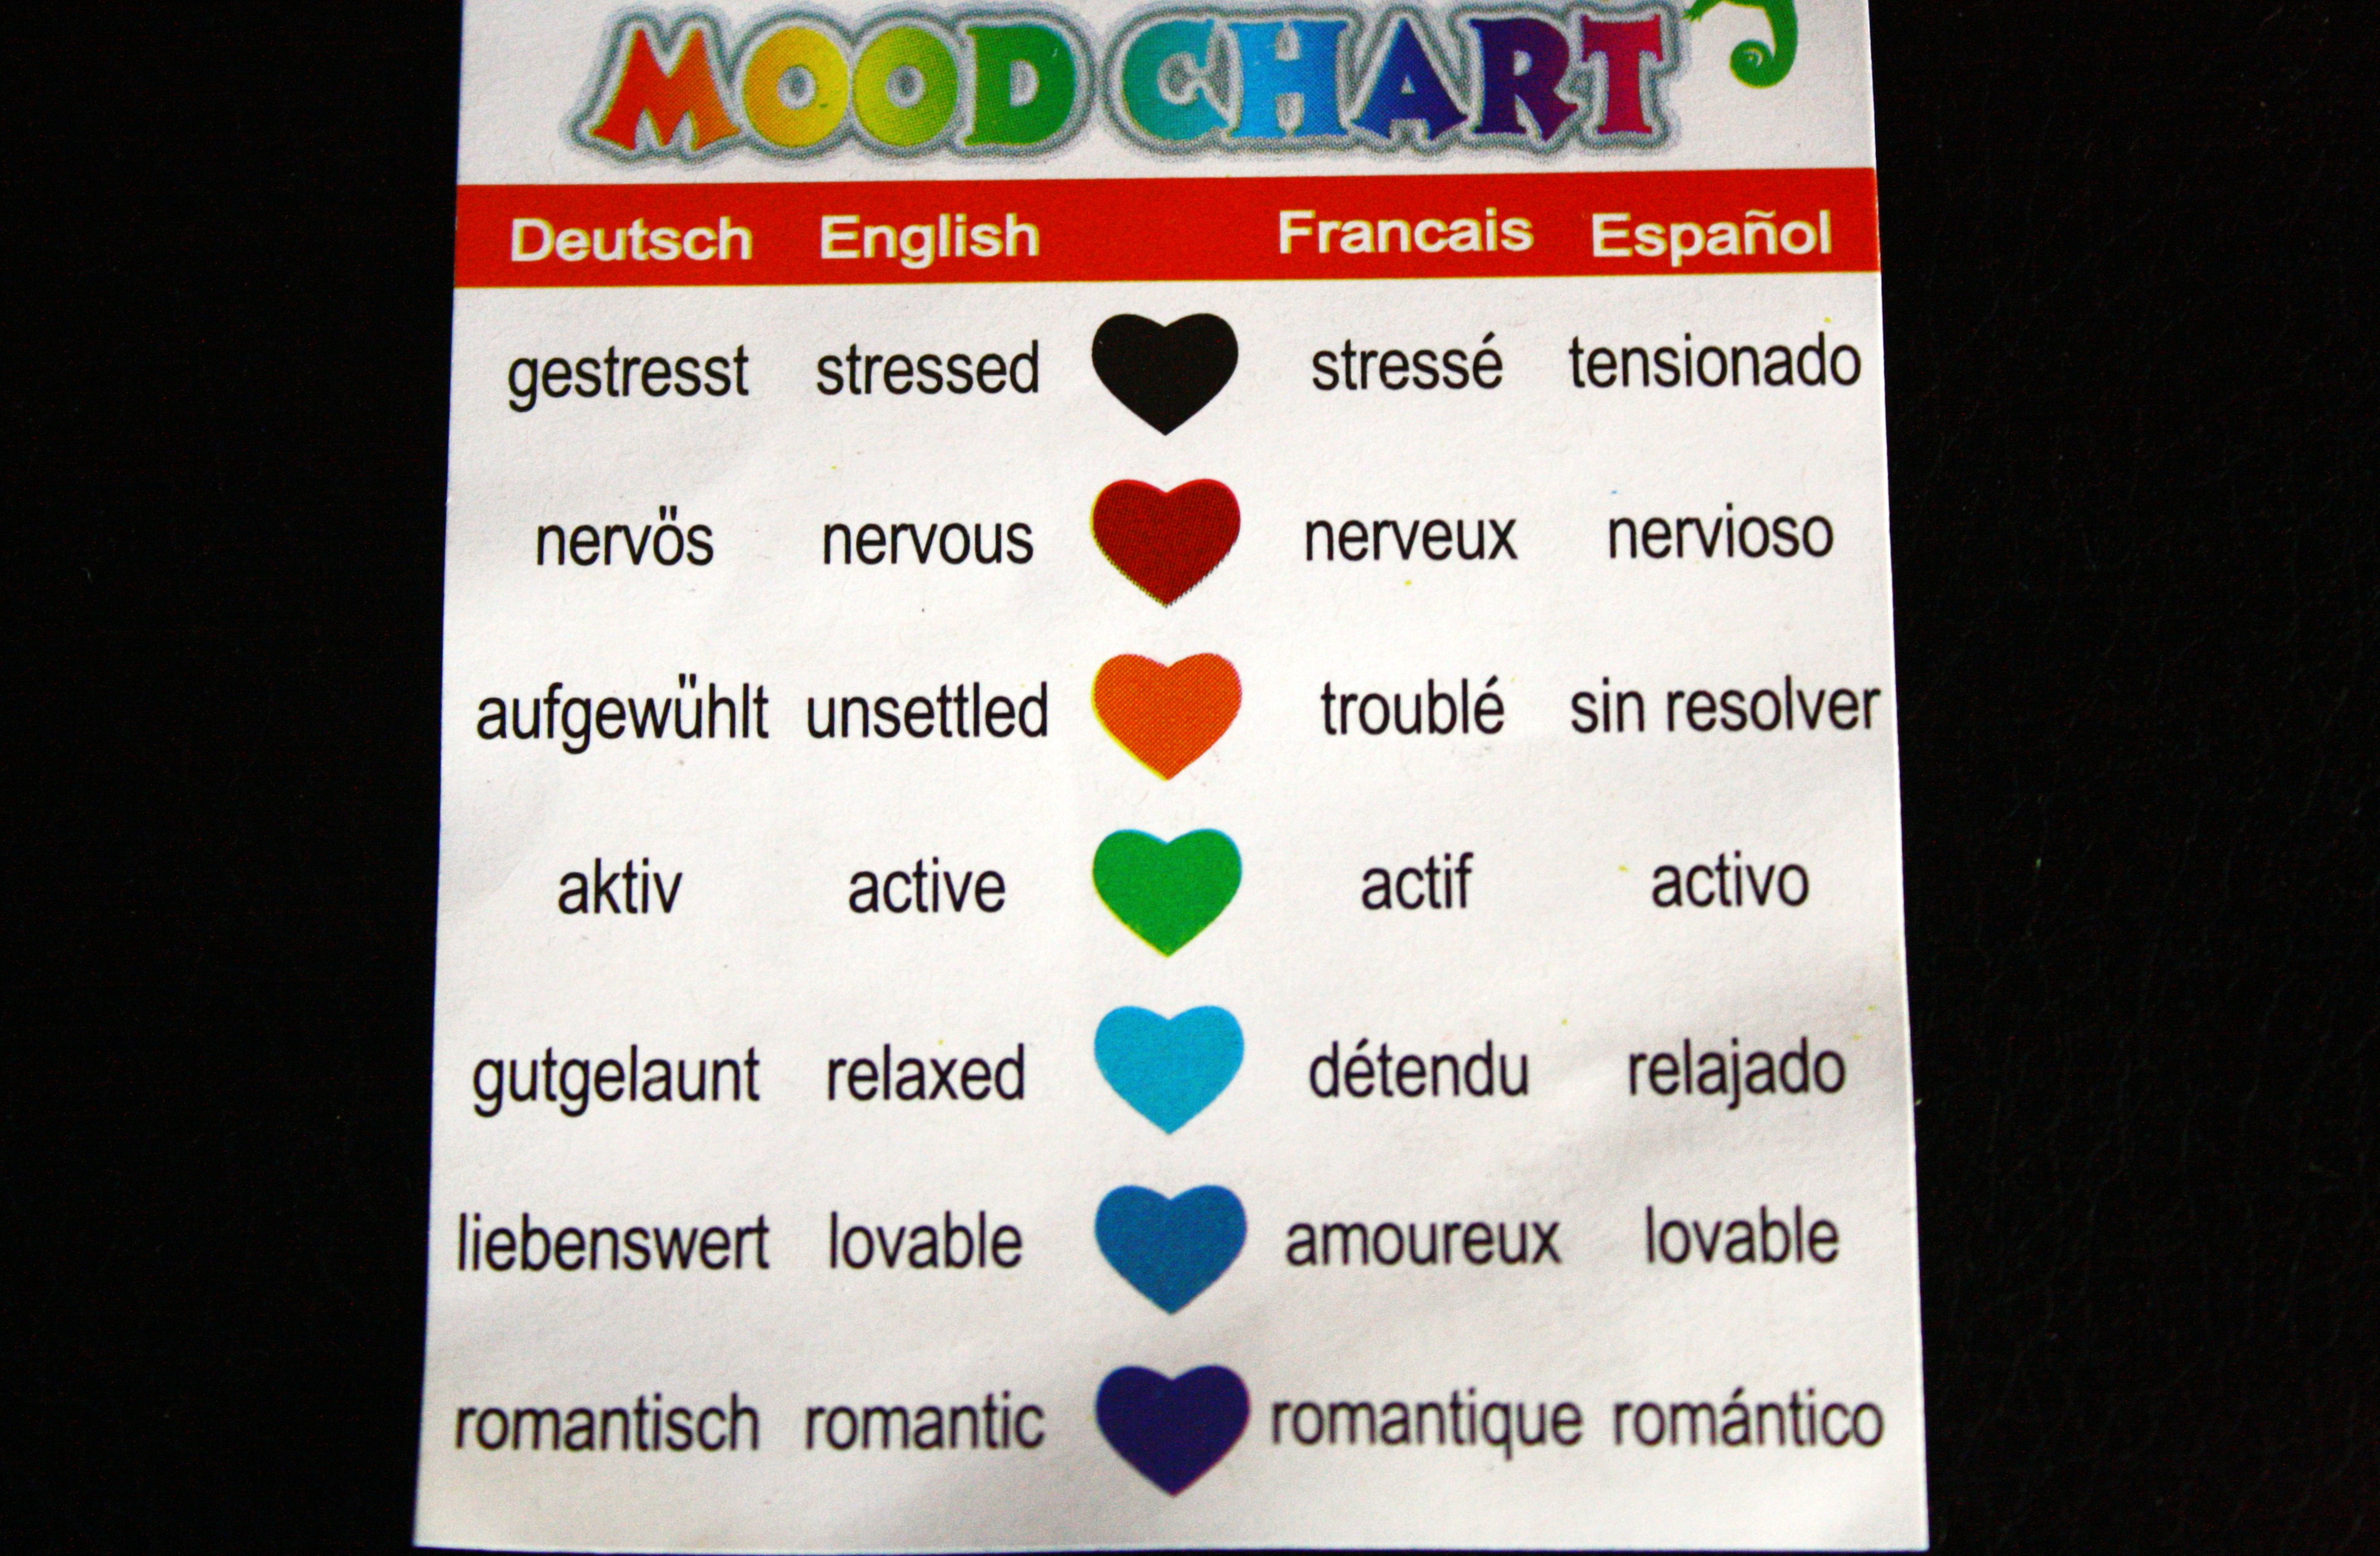 The Mood Ring Chart